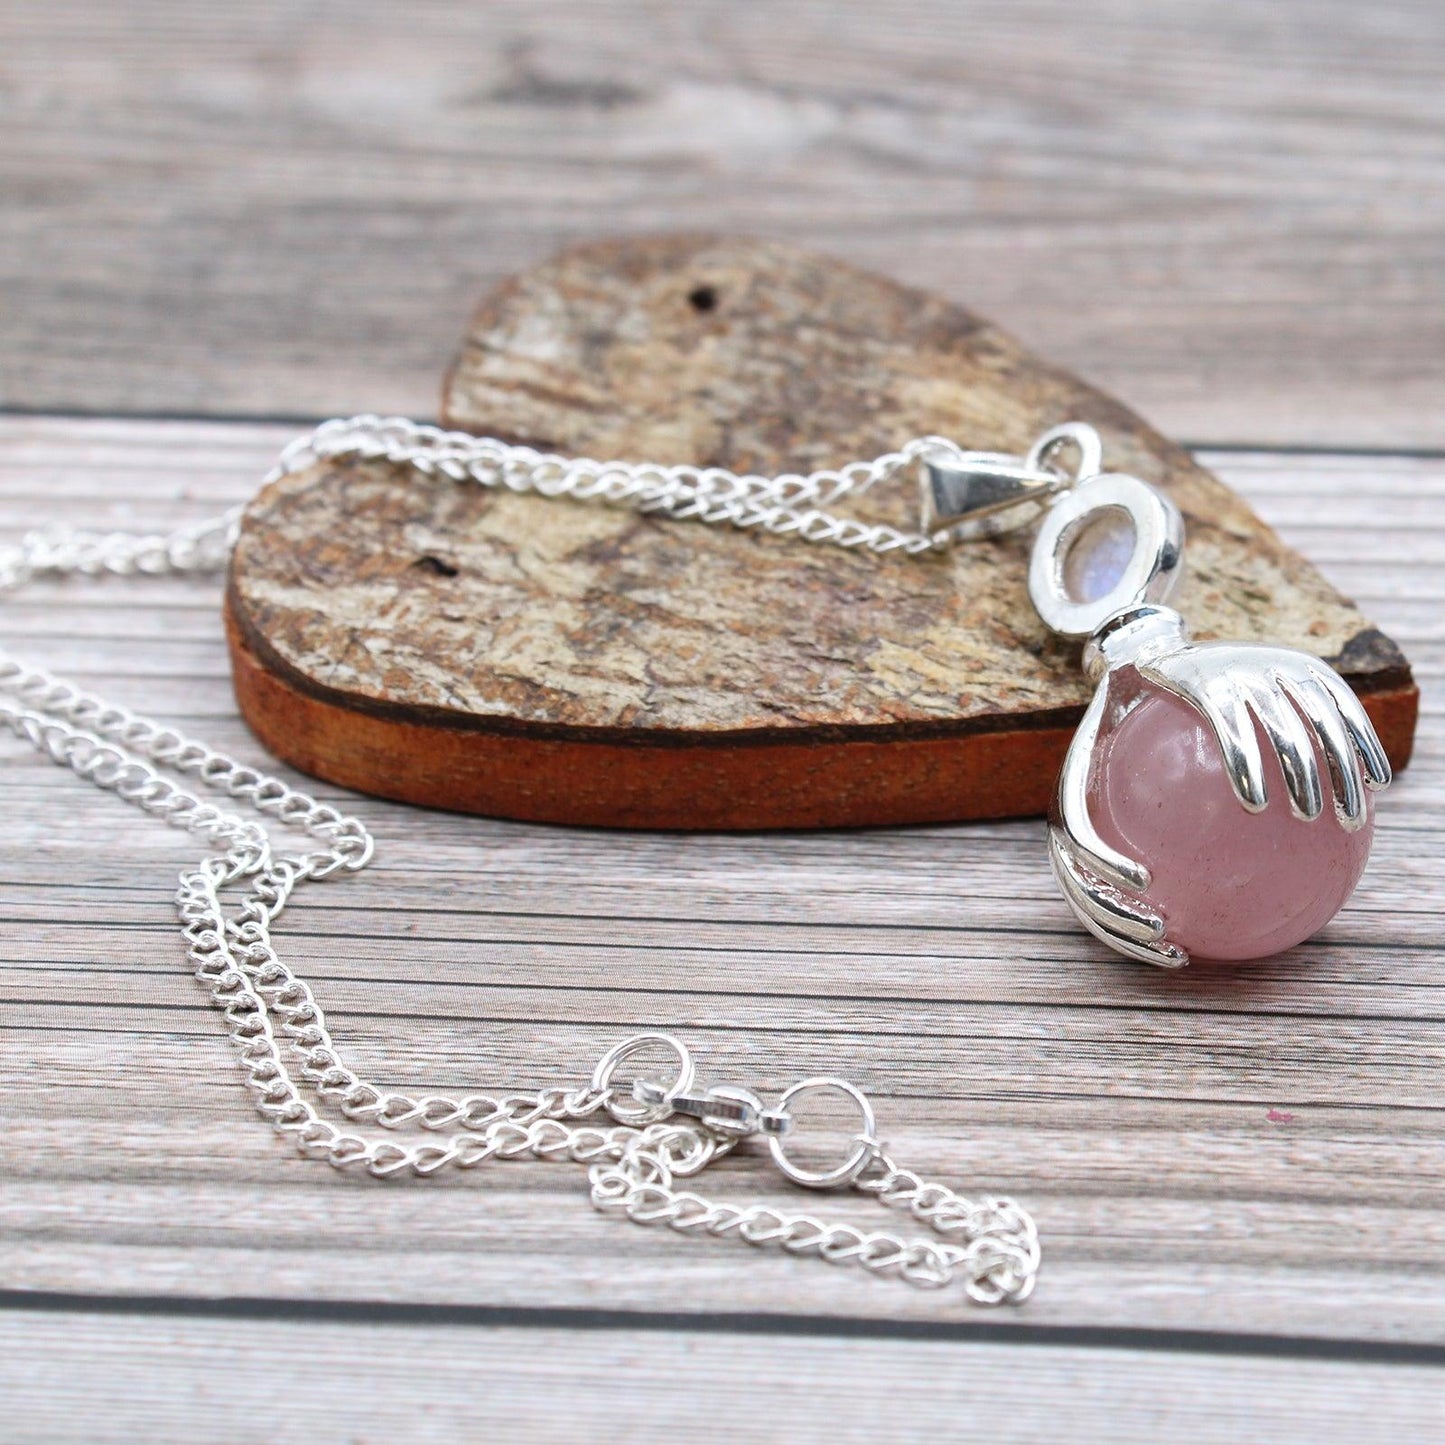 Gemstone Healing Hands Pendant Necklace - Rose Quartz - Free Pouch - Home Inspired Gifts